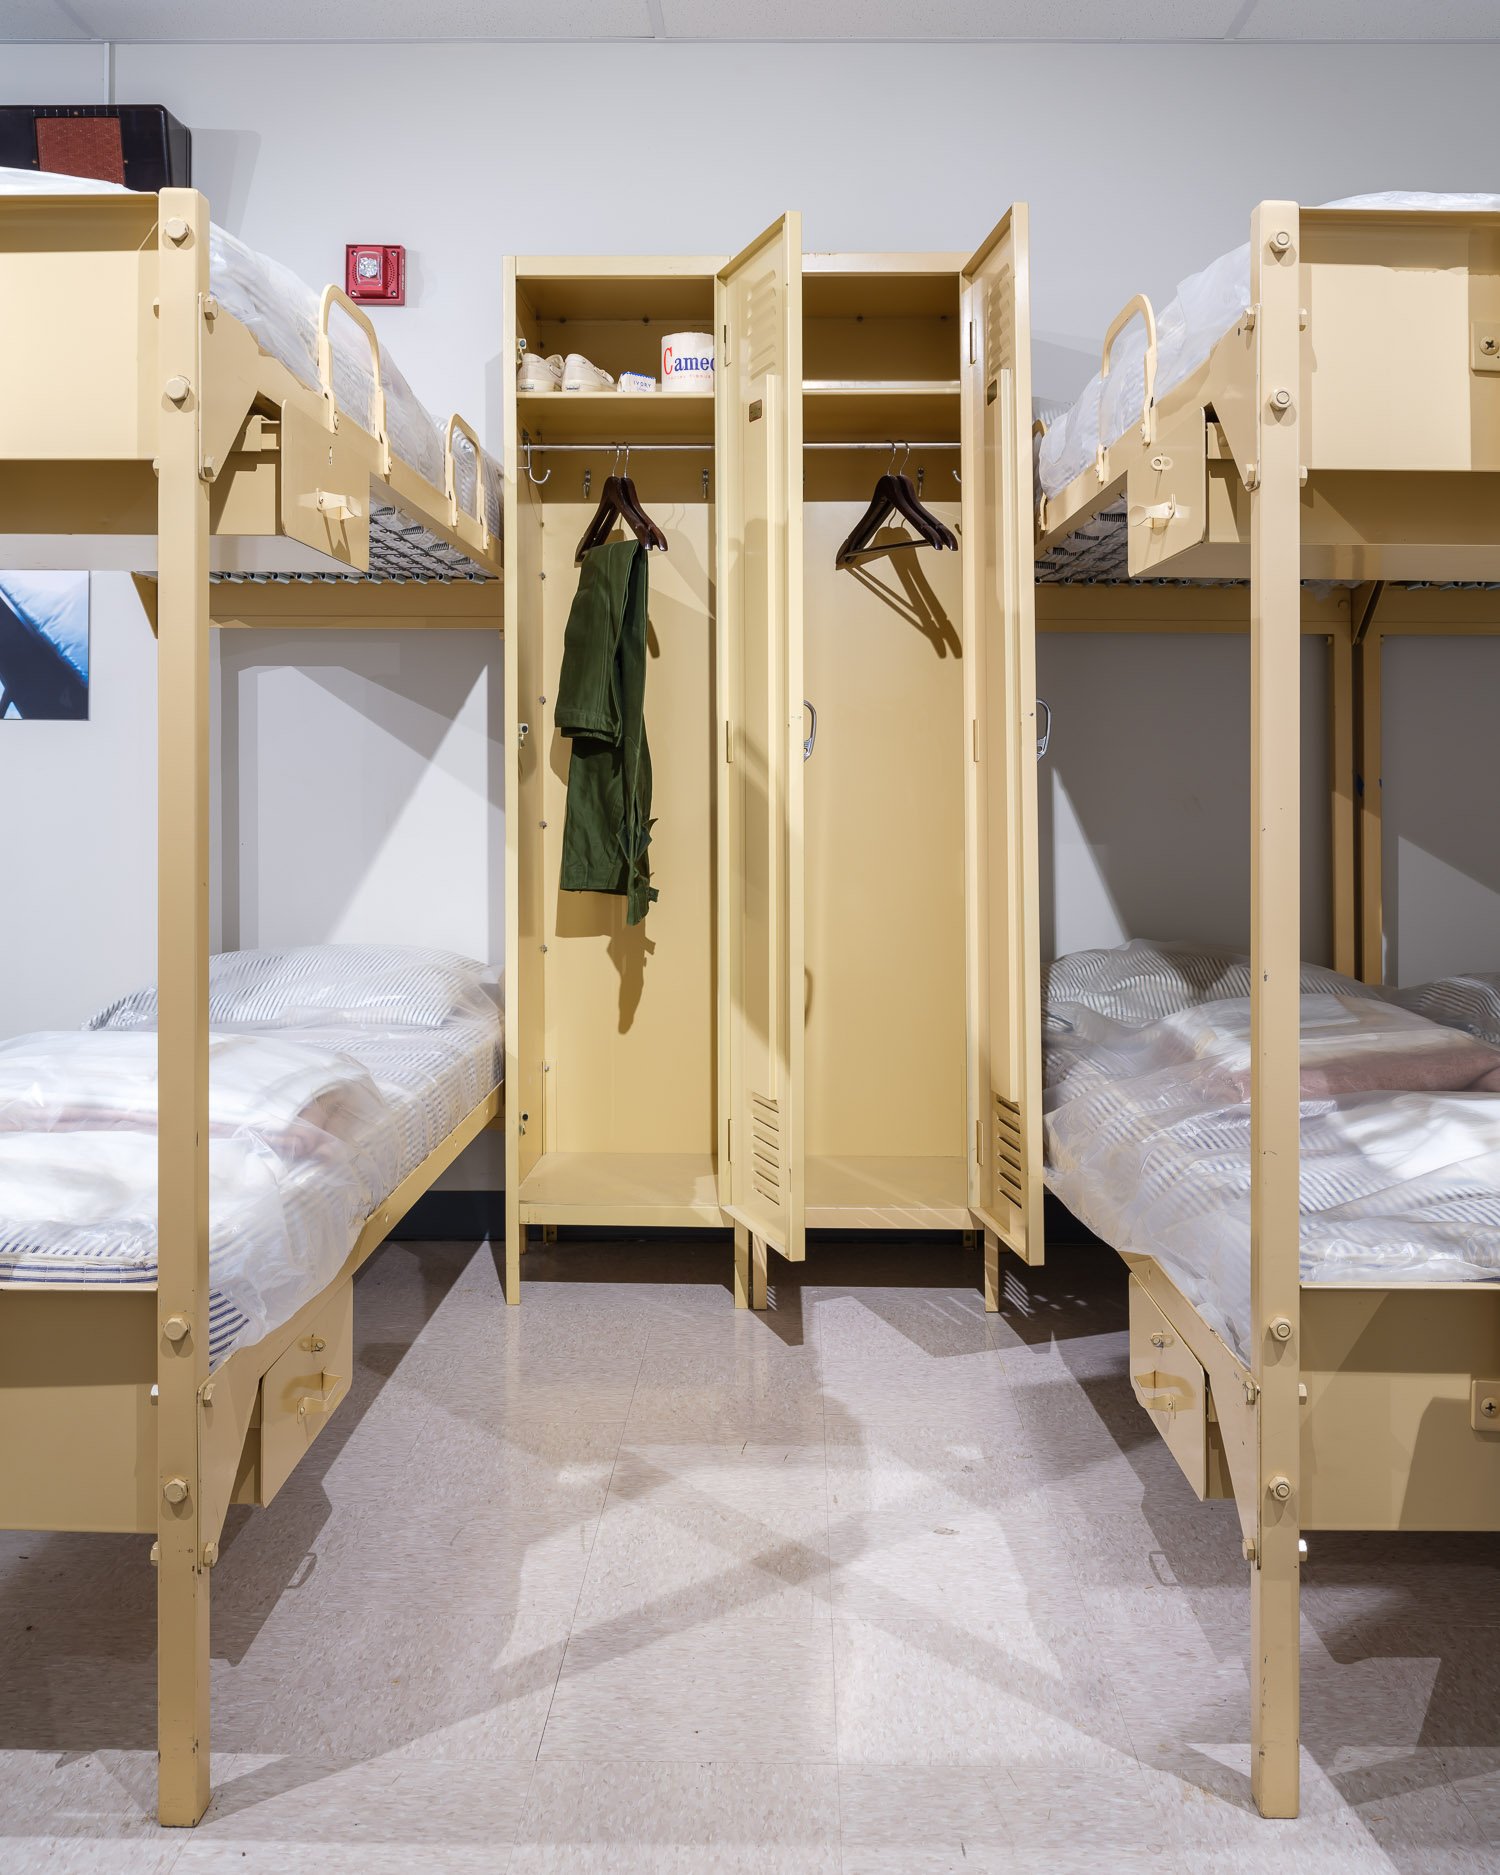  Dormitories. The dormitories comprise 18 rooms, each built to house 60 people in metal bunk beds. There is also a kitchen and a 400-seat cafeteria, which was at one point decorated with fake windows featuring scenic views. 